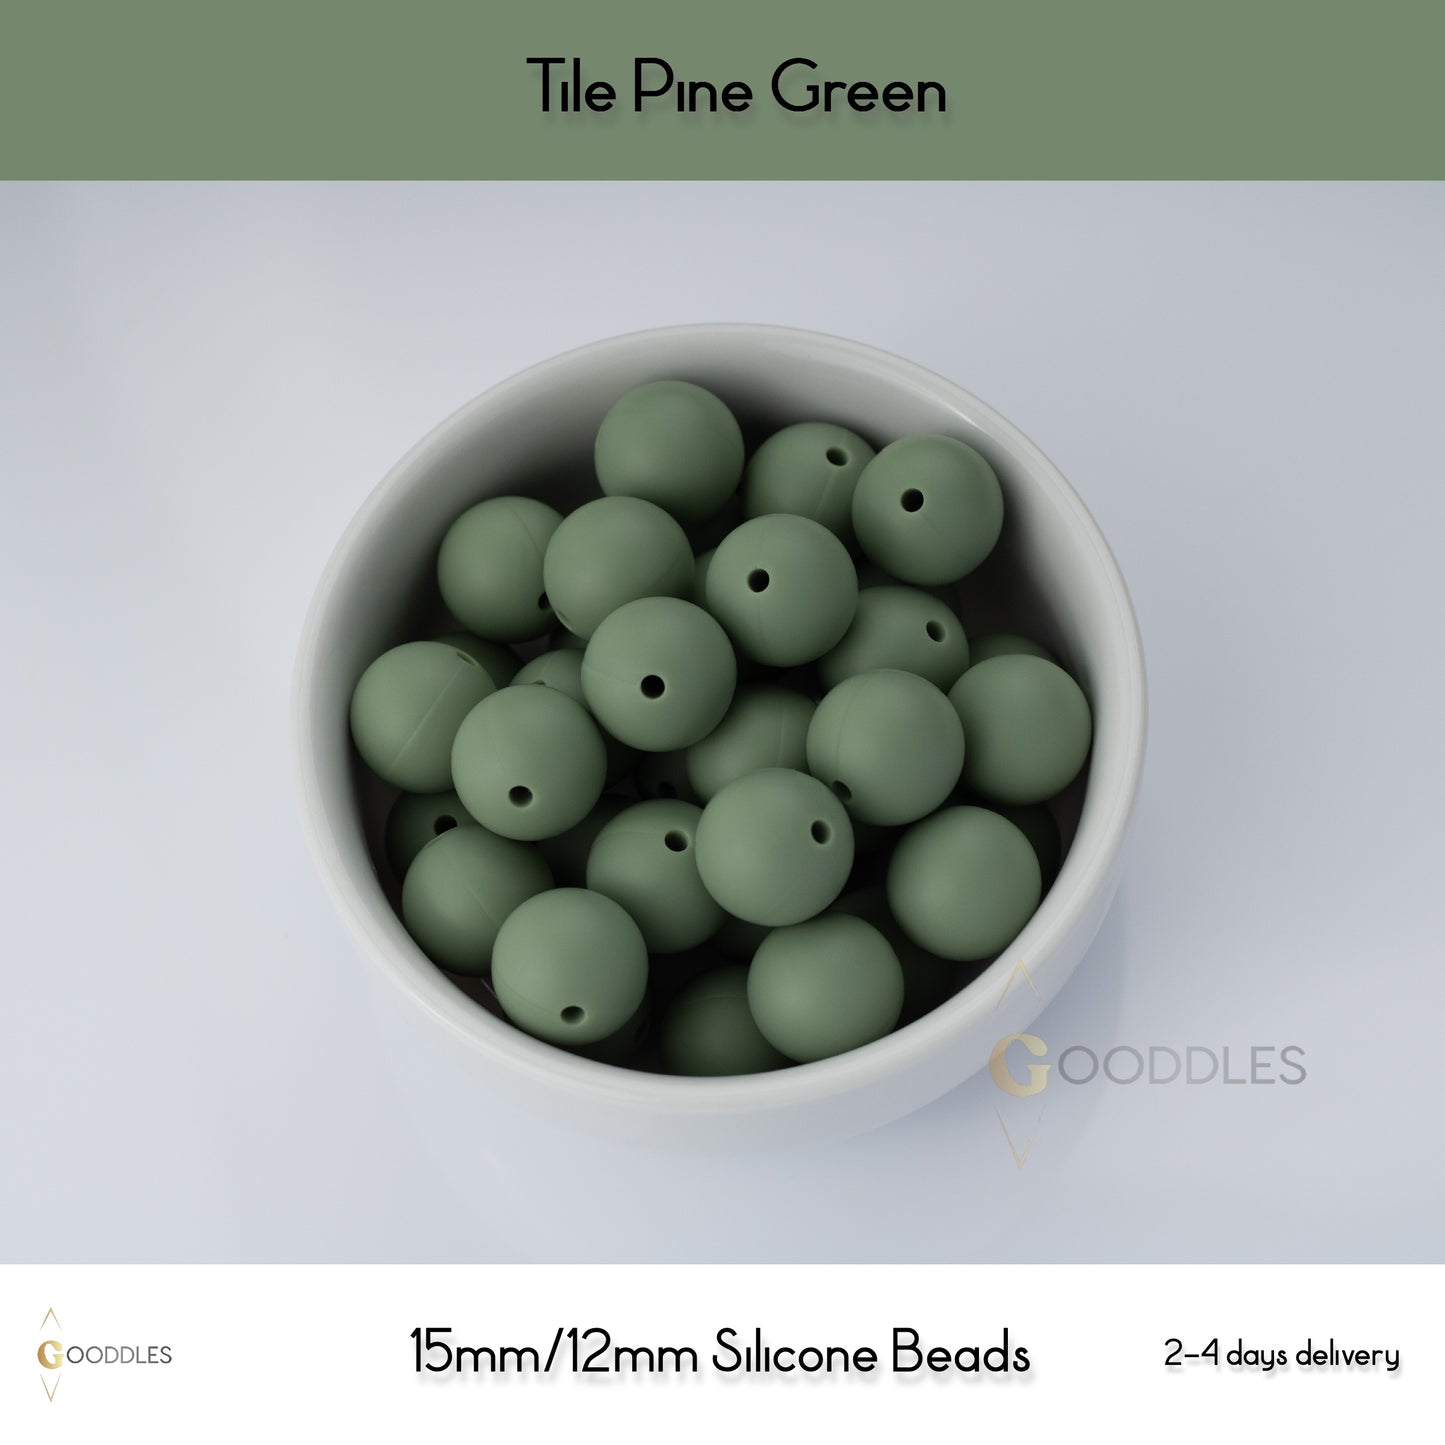 5pcs, Tile Pine Green Silicone Beads Round Silicone Beads